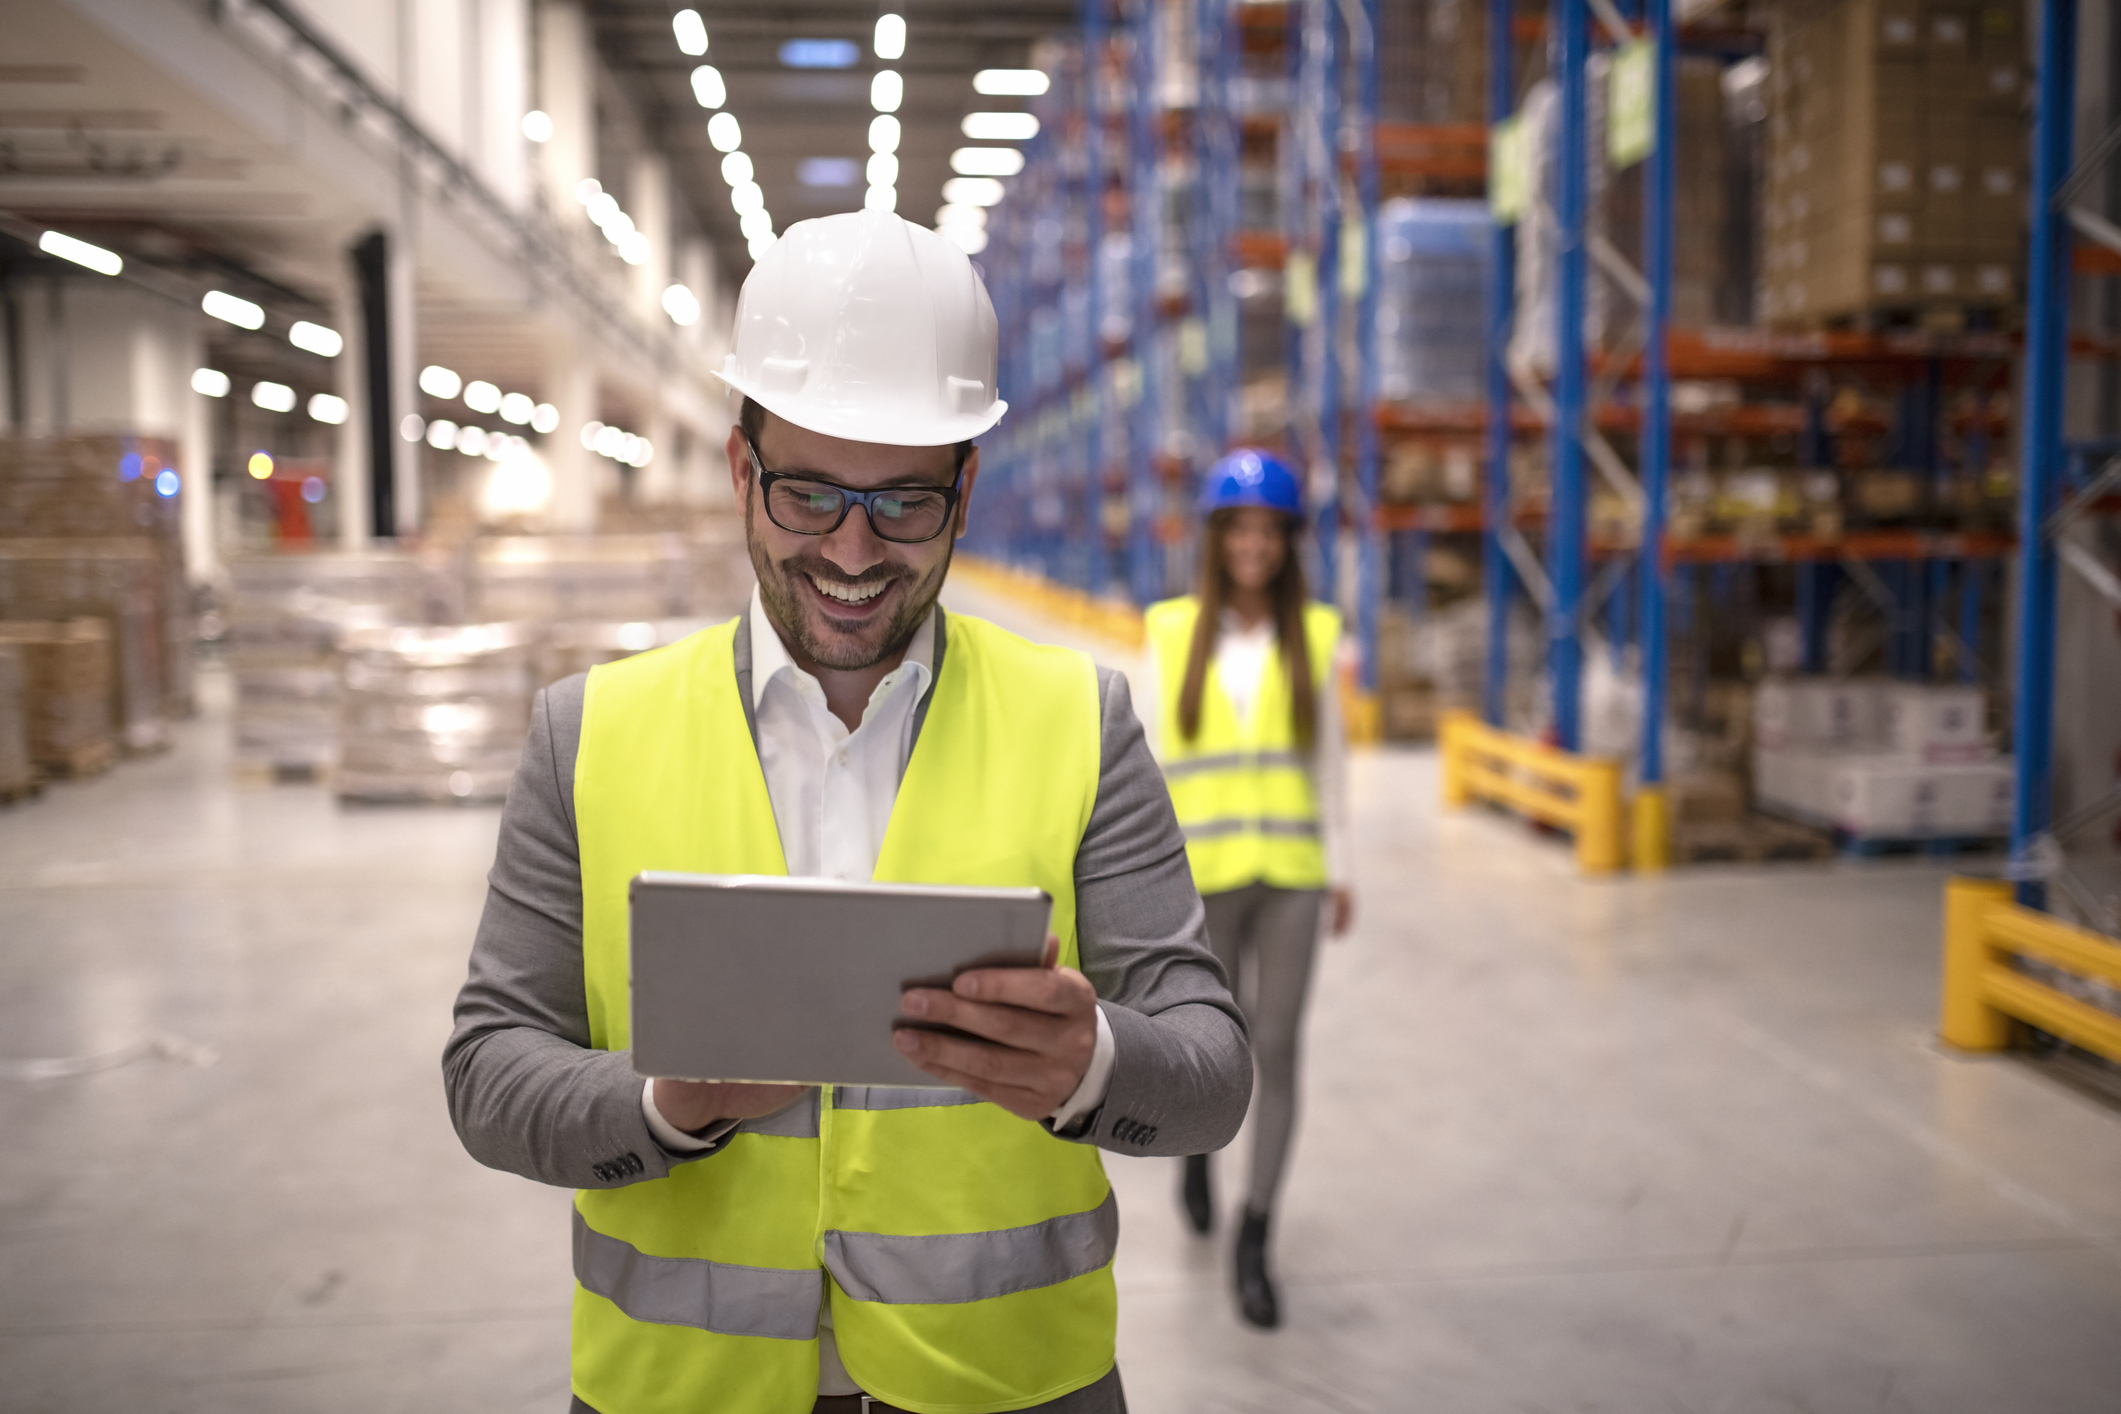 Warehouse manager reading report on tablet about successful delivery and distribution in warehouse logistics center. In background coworker checking inventory and productivity in storage area.